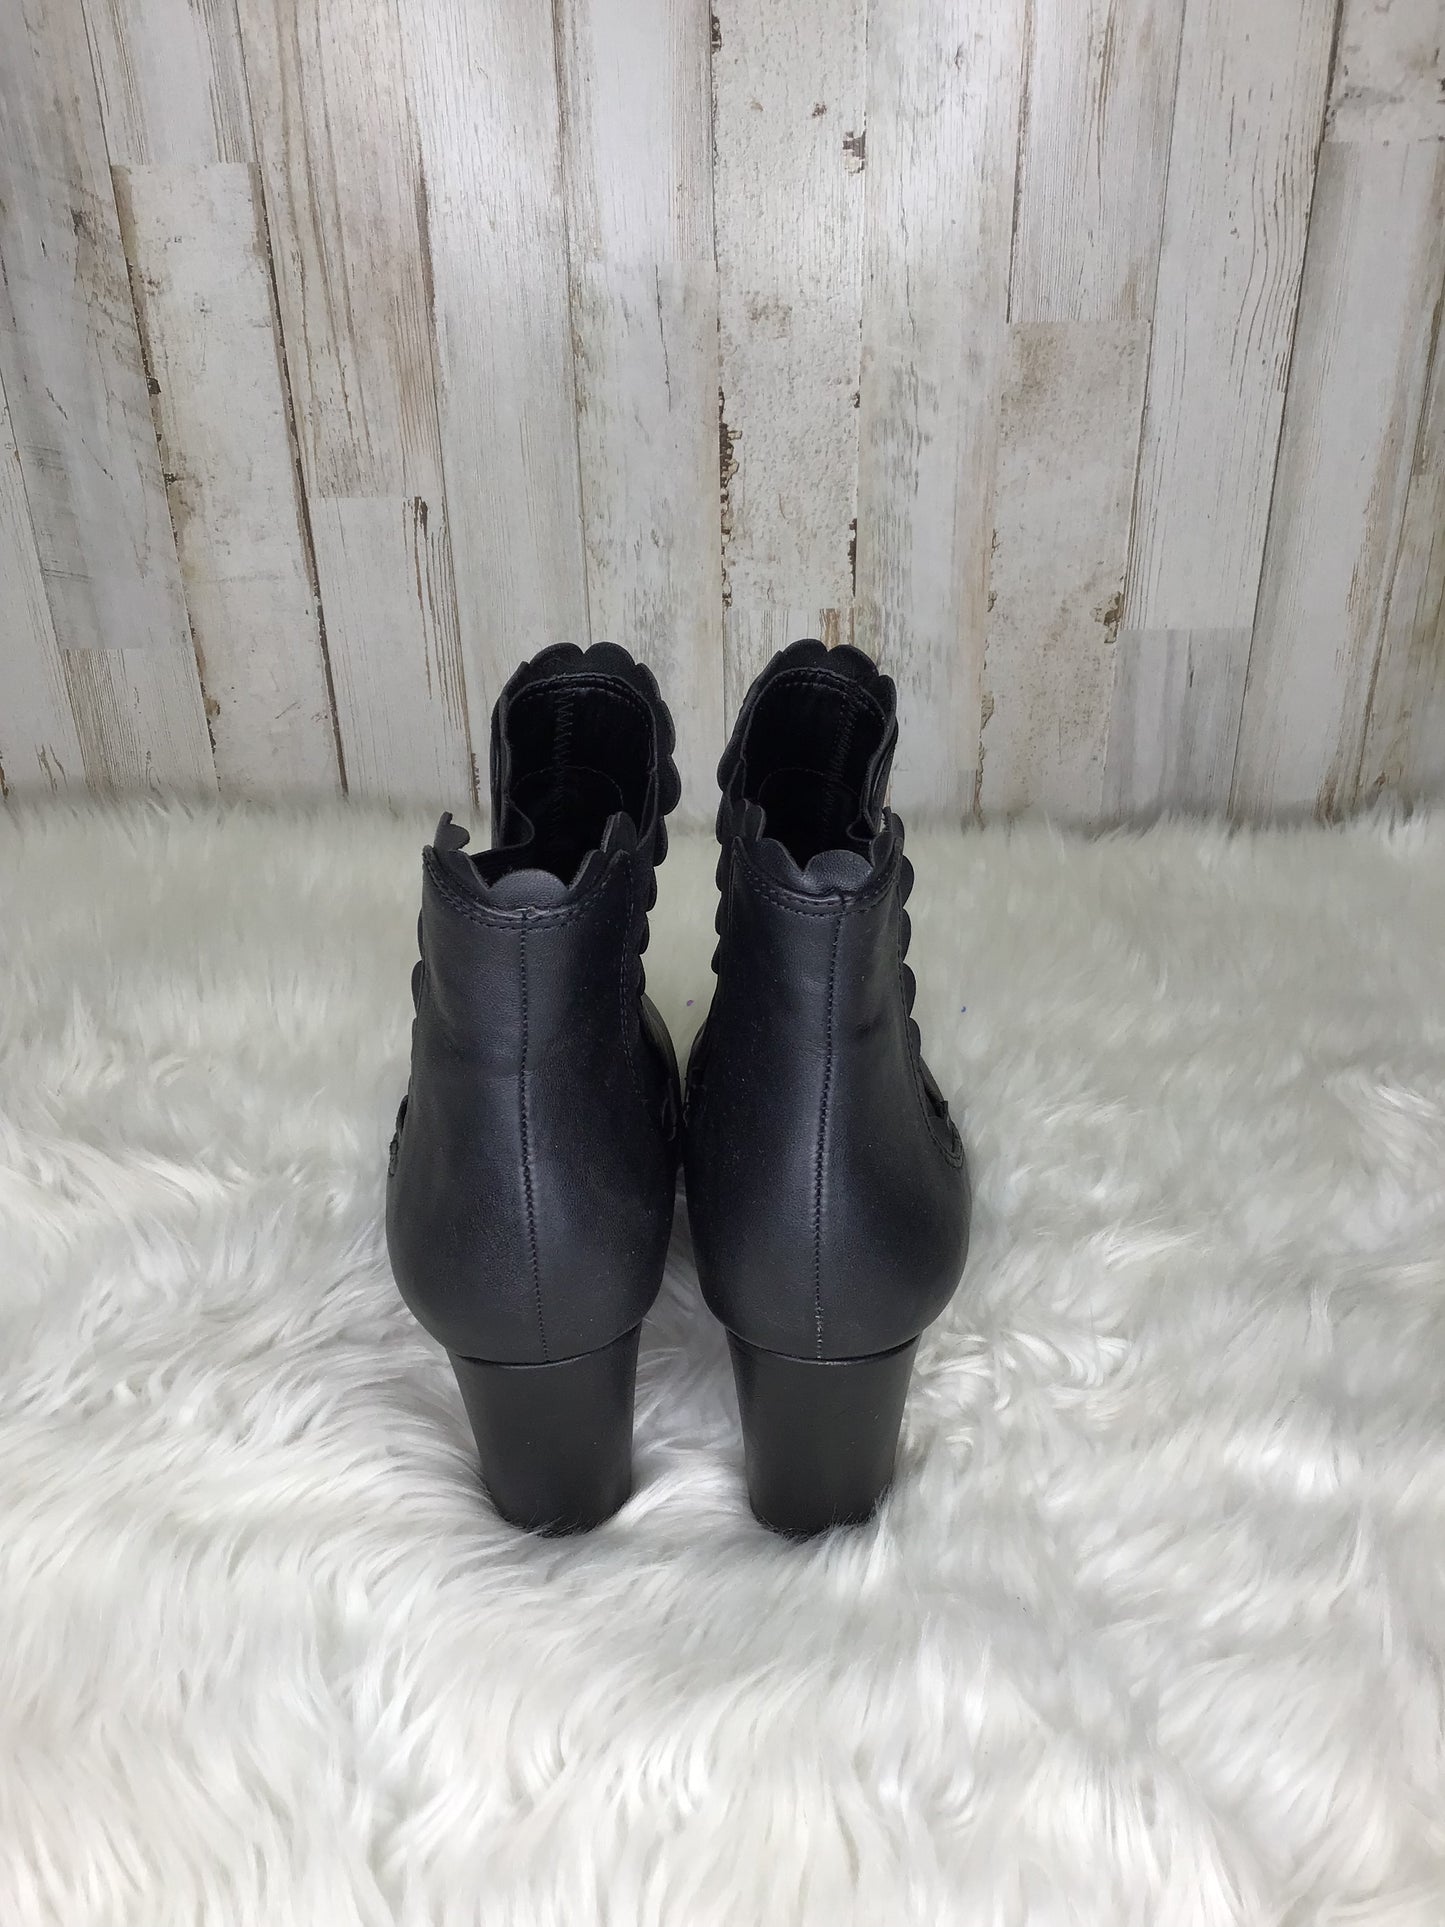 Boots Ankle Heels By Crown And Ivy  Size: 9.5